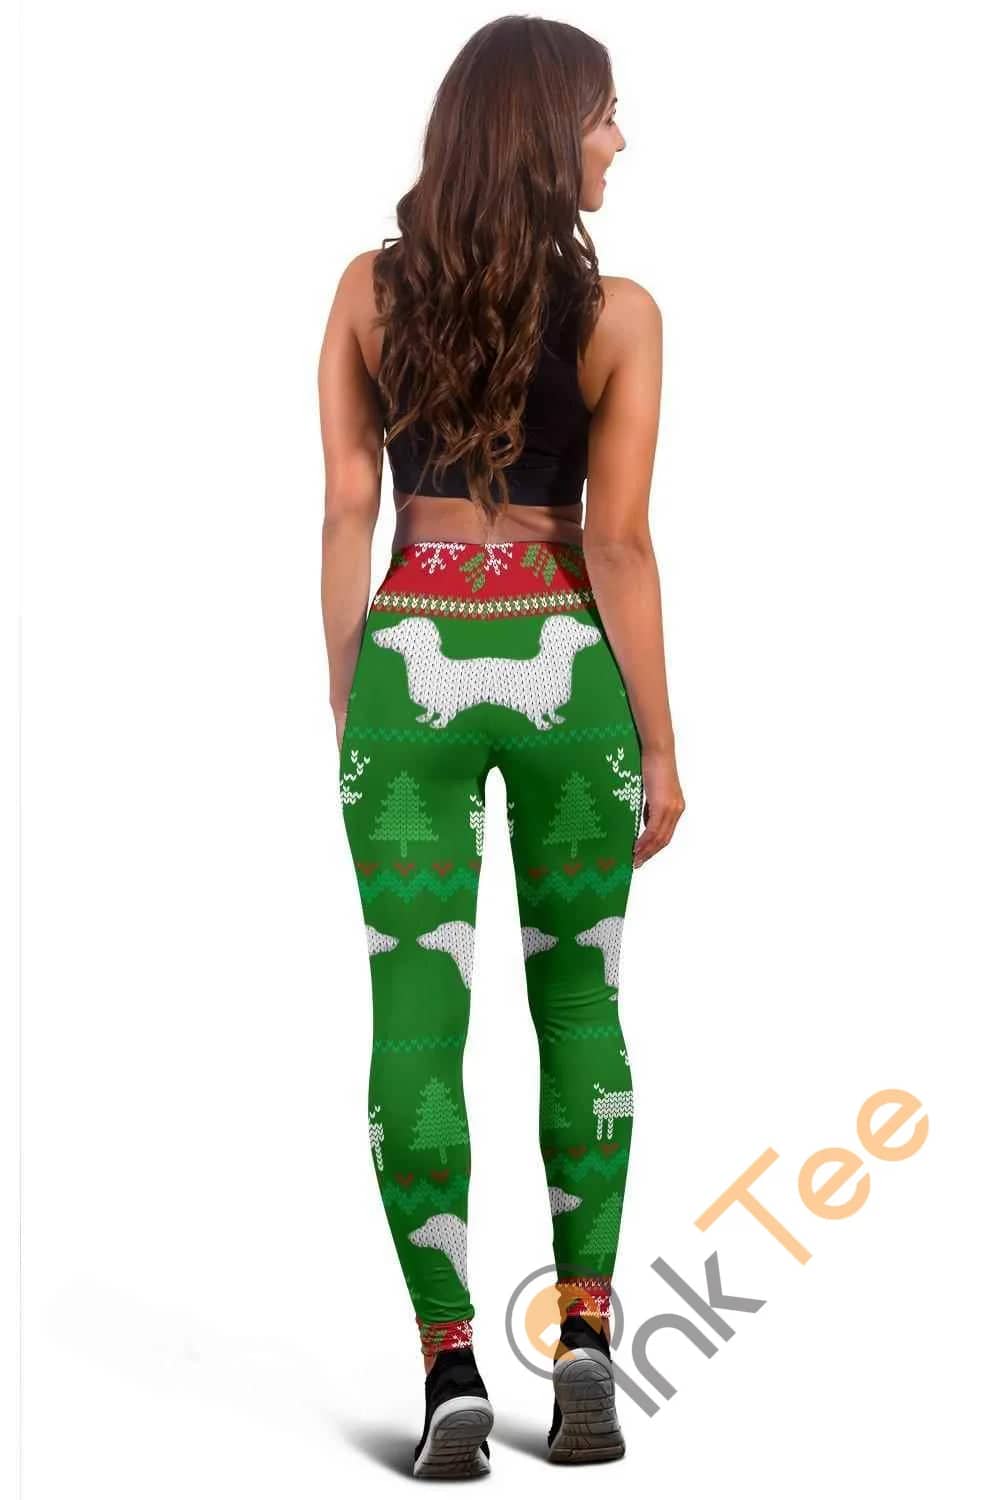 Ugly Christmas Sweater 3D All Over Print For Yoga Fitness With Dachshunds Women'S Leggings